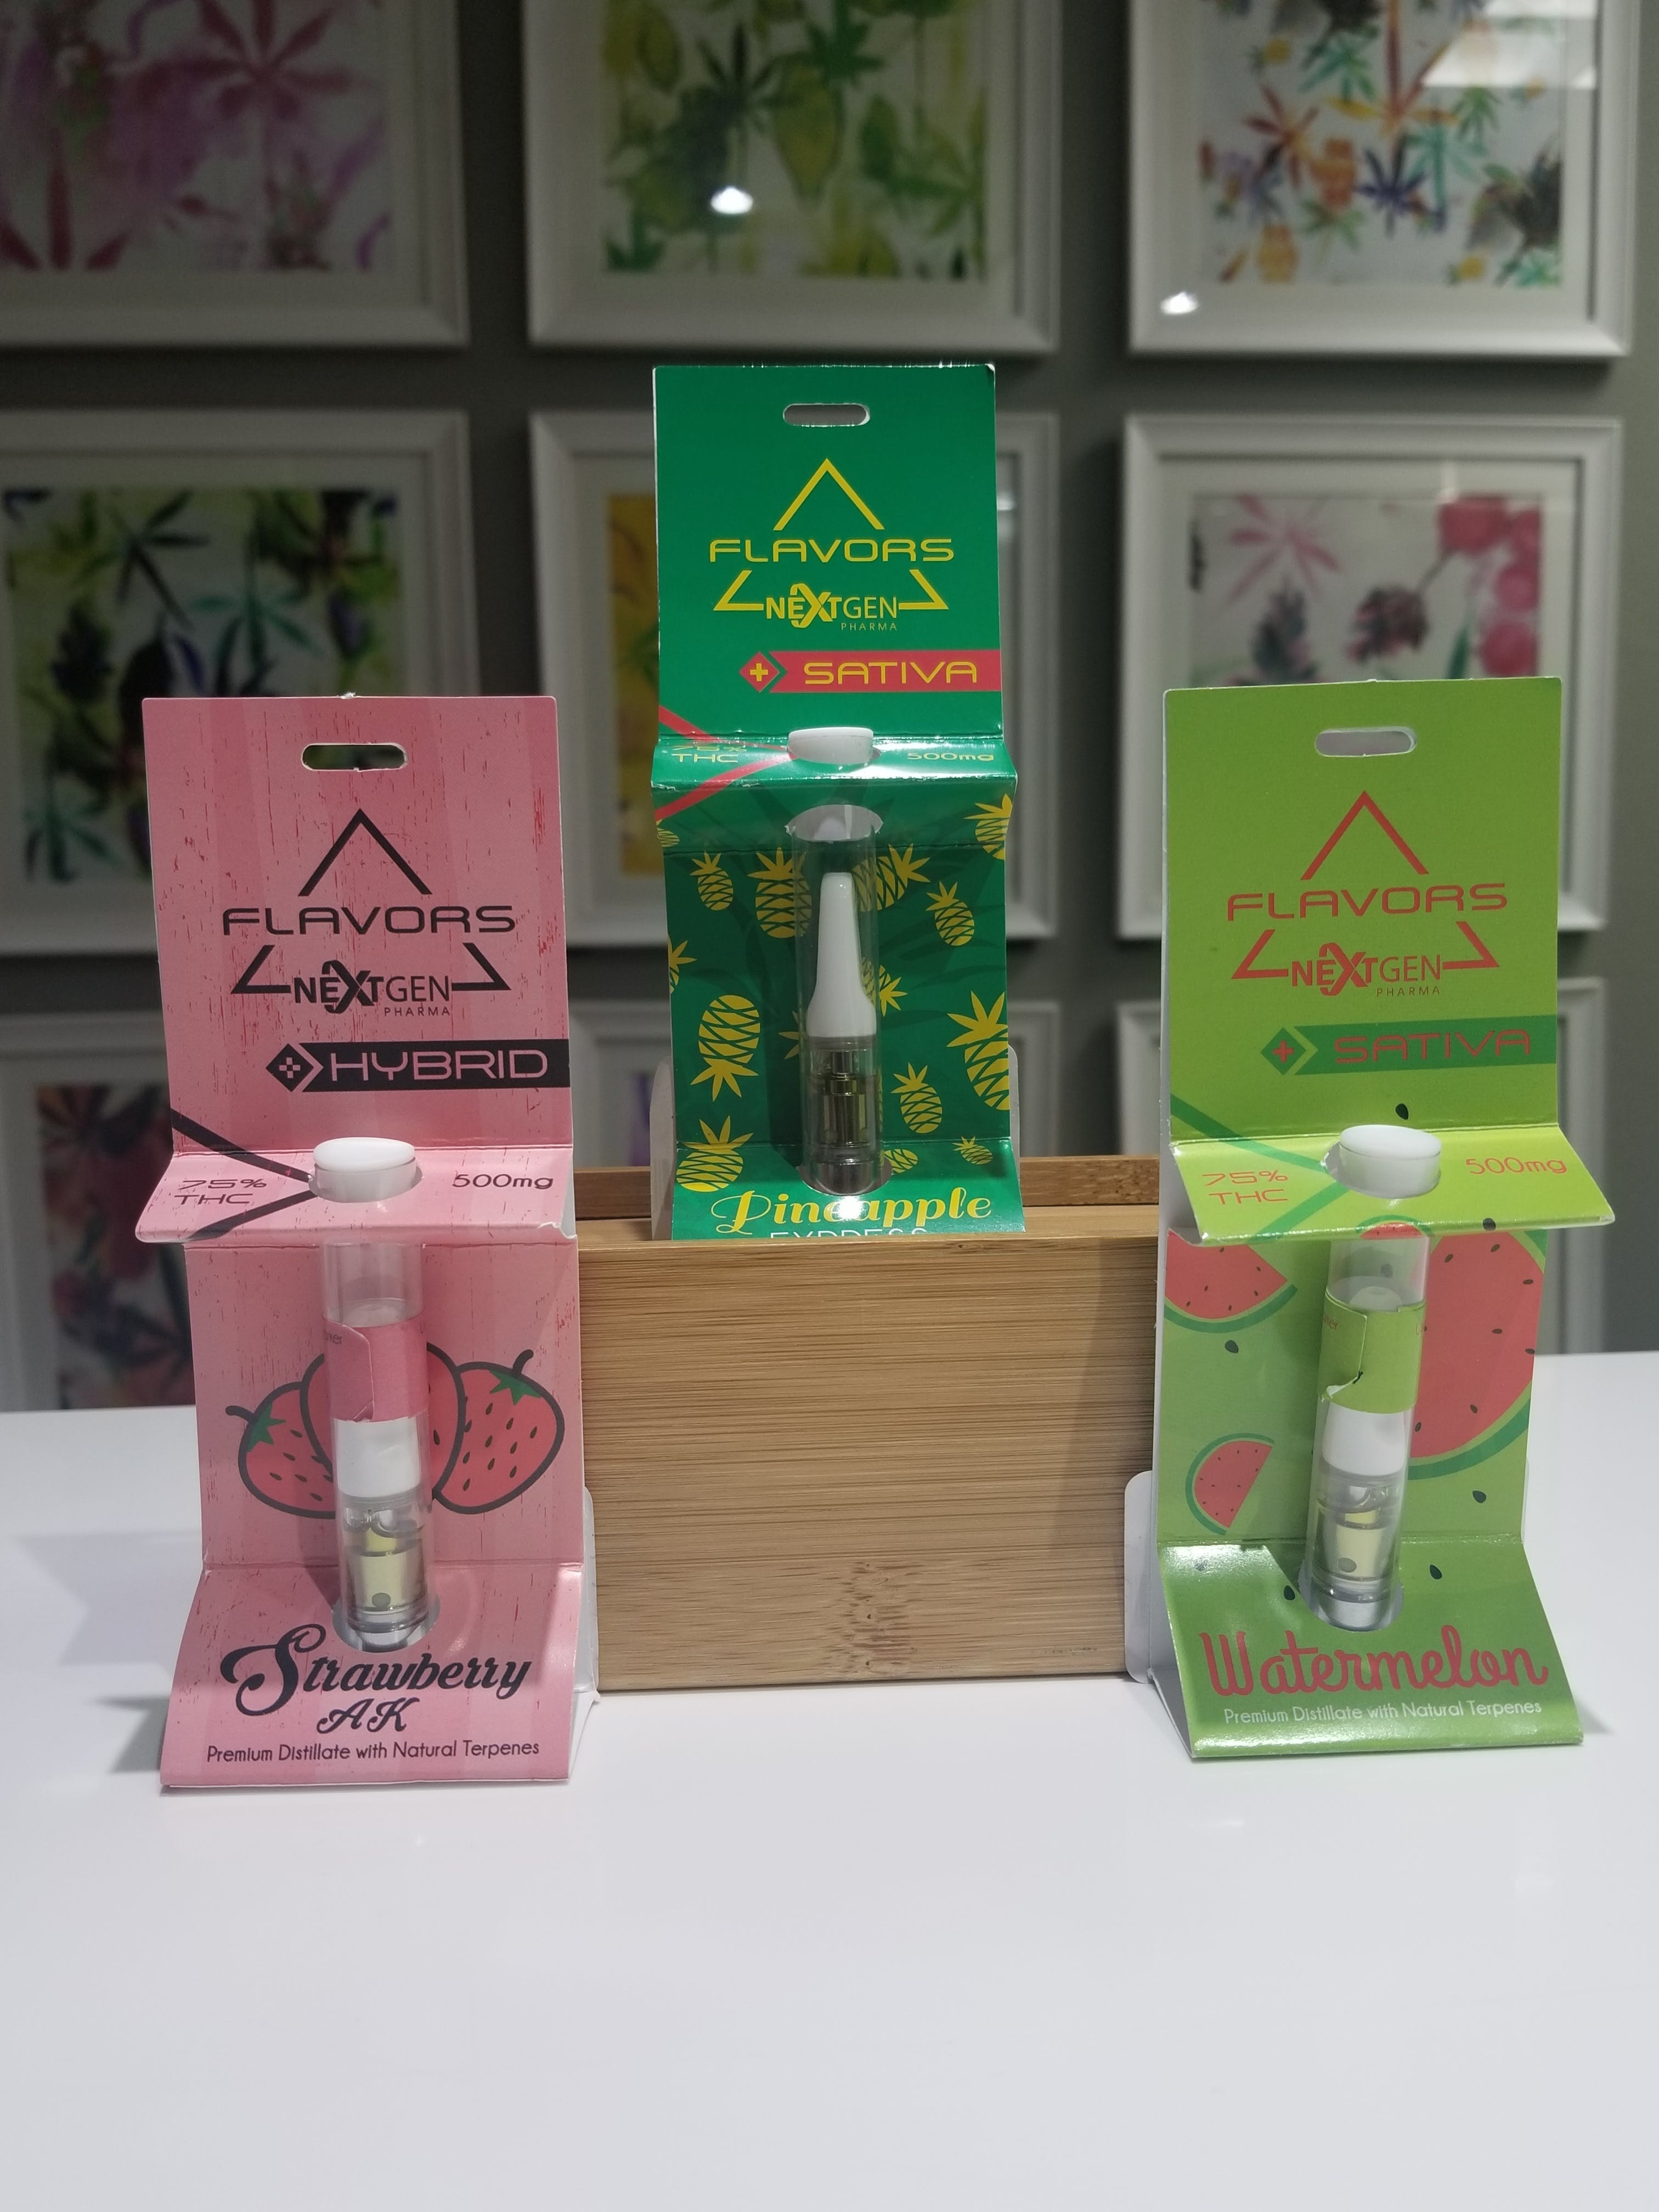 concentrate-flavors-cartridge-500mg-watermelon